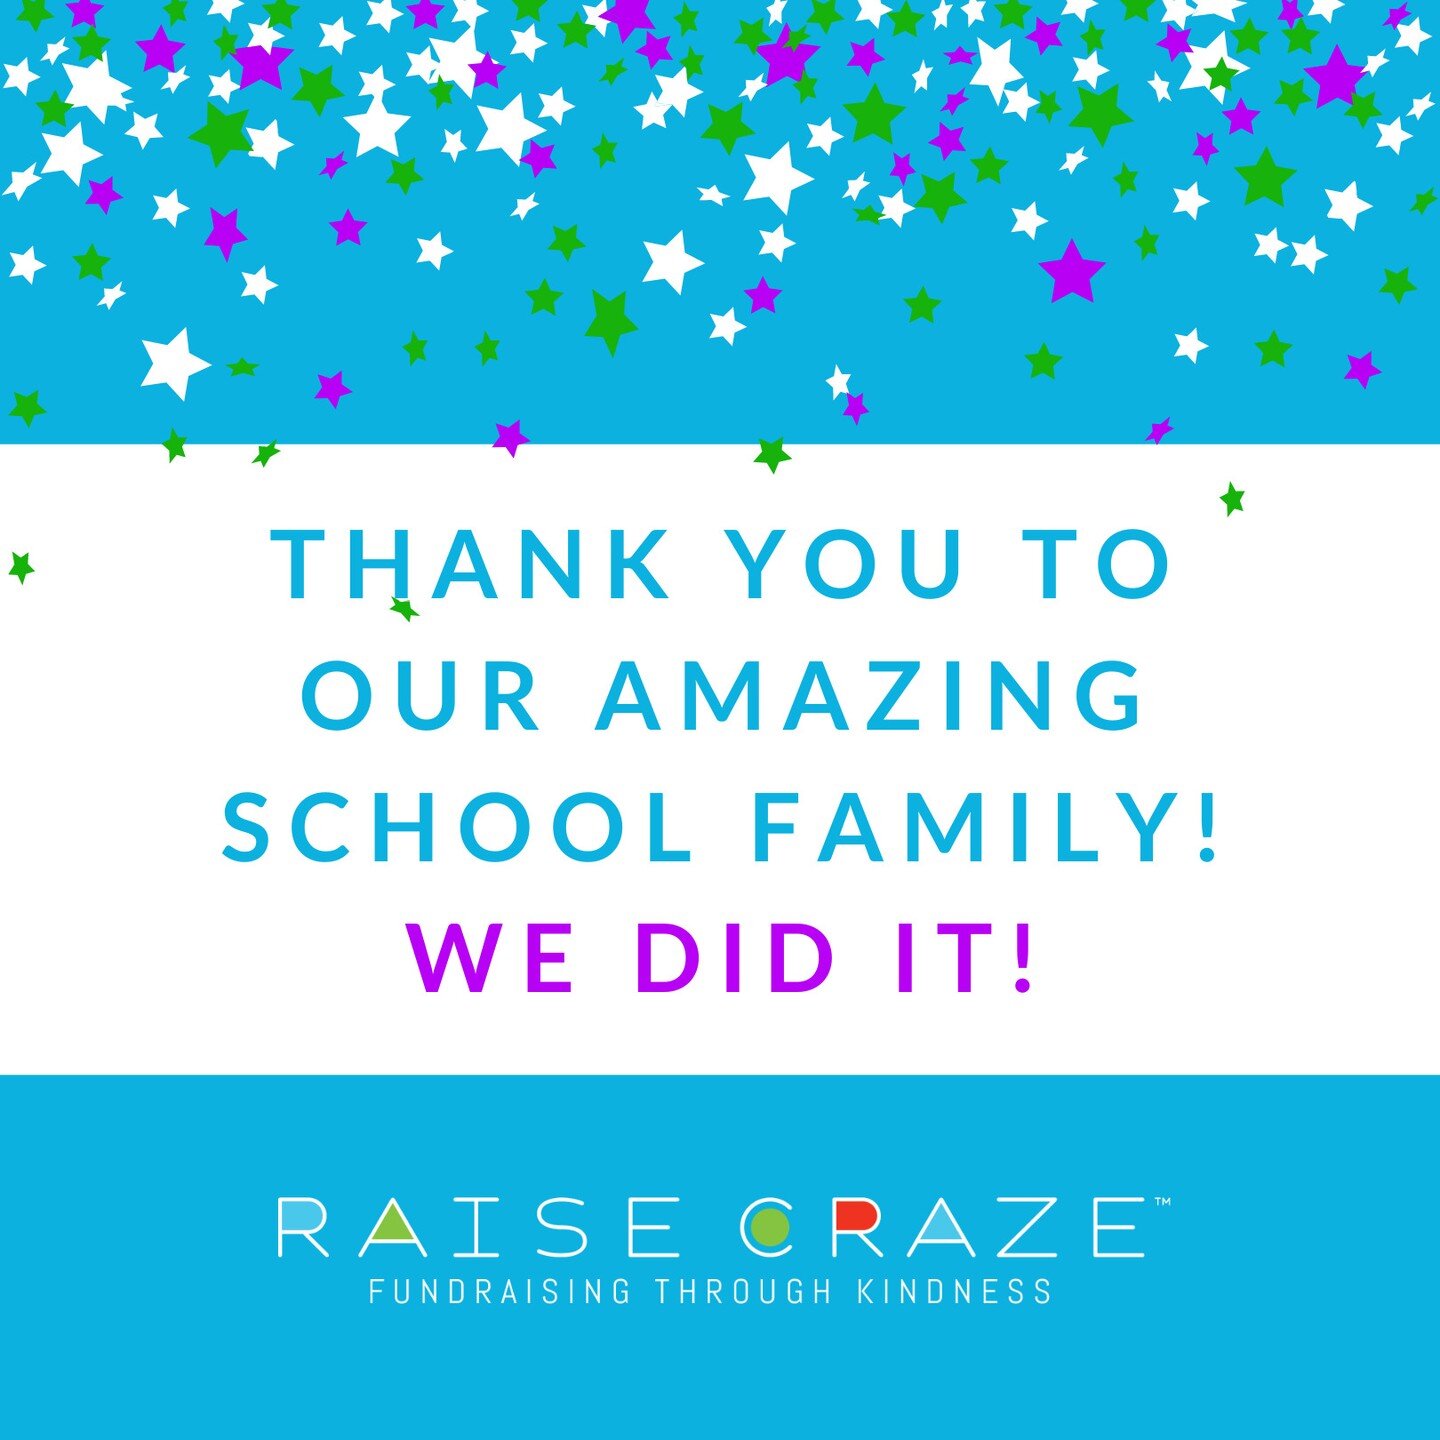 Our Raise Craze fundraiser has ended and we couldn&rsquo;t be more thrilled! Our students completed 🎉470 Acts of Kindness and raised 🎉$19,952! 

A big thank you all who worked so hard to make this fundraiser a success - we couldn&rsquo;t have done 